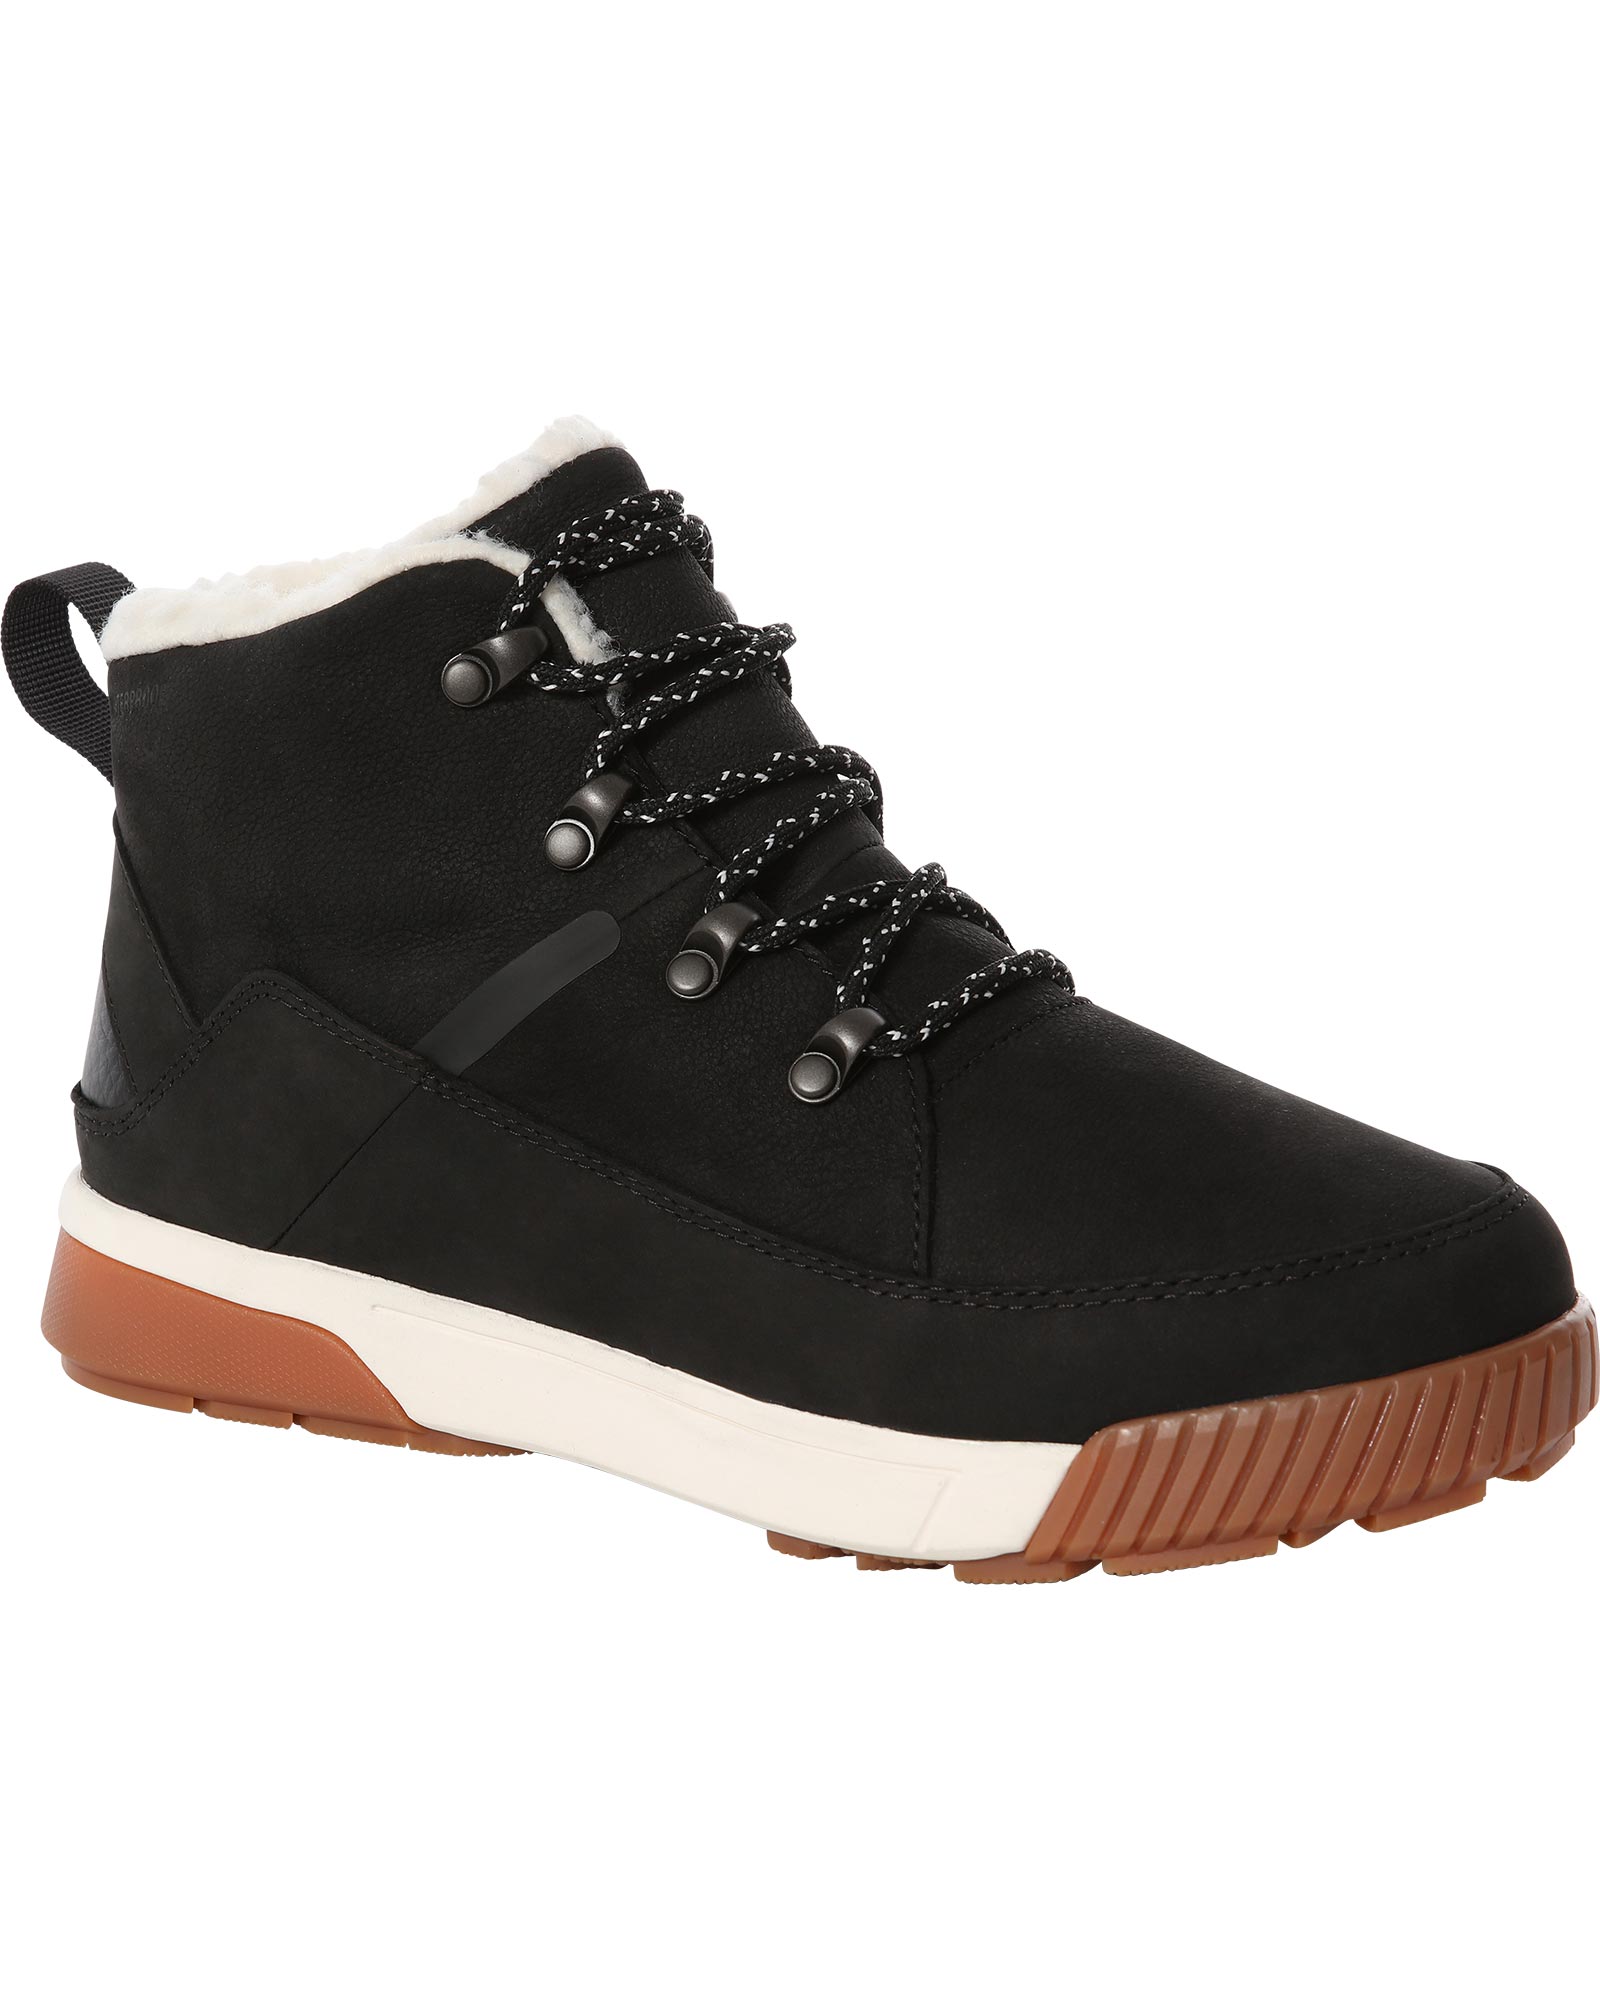 The North Face Women's Sierra Mid Lace Waterproof Boots